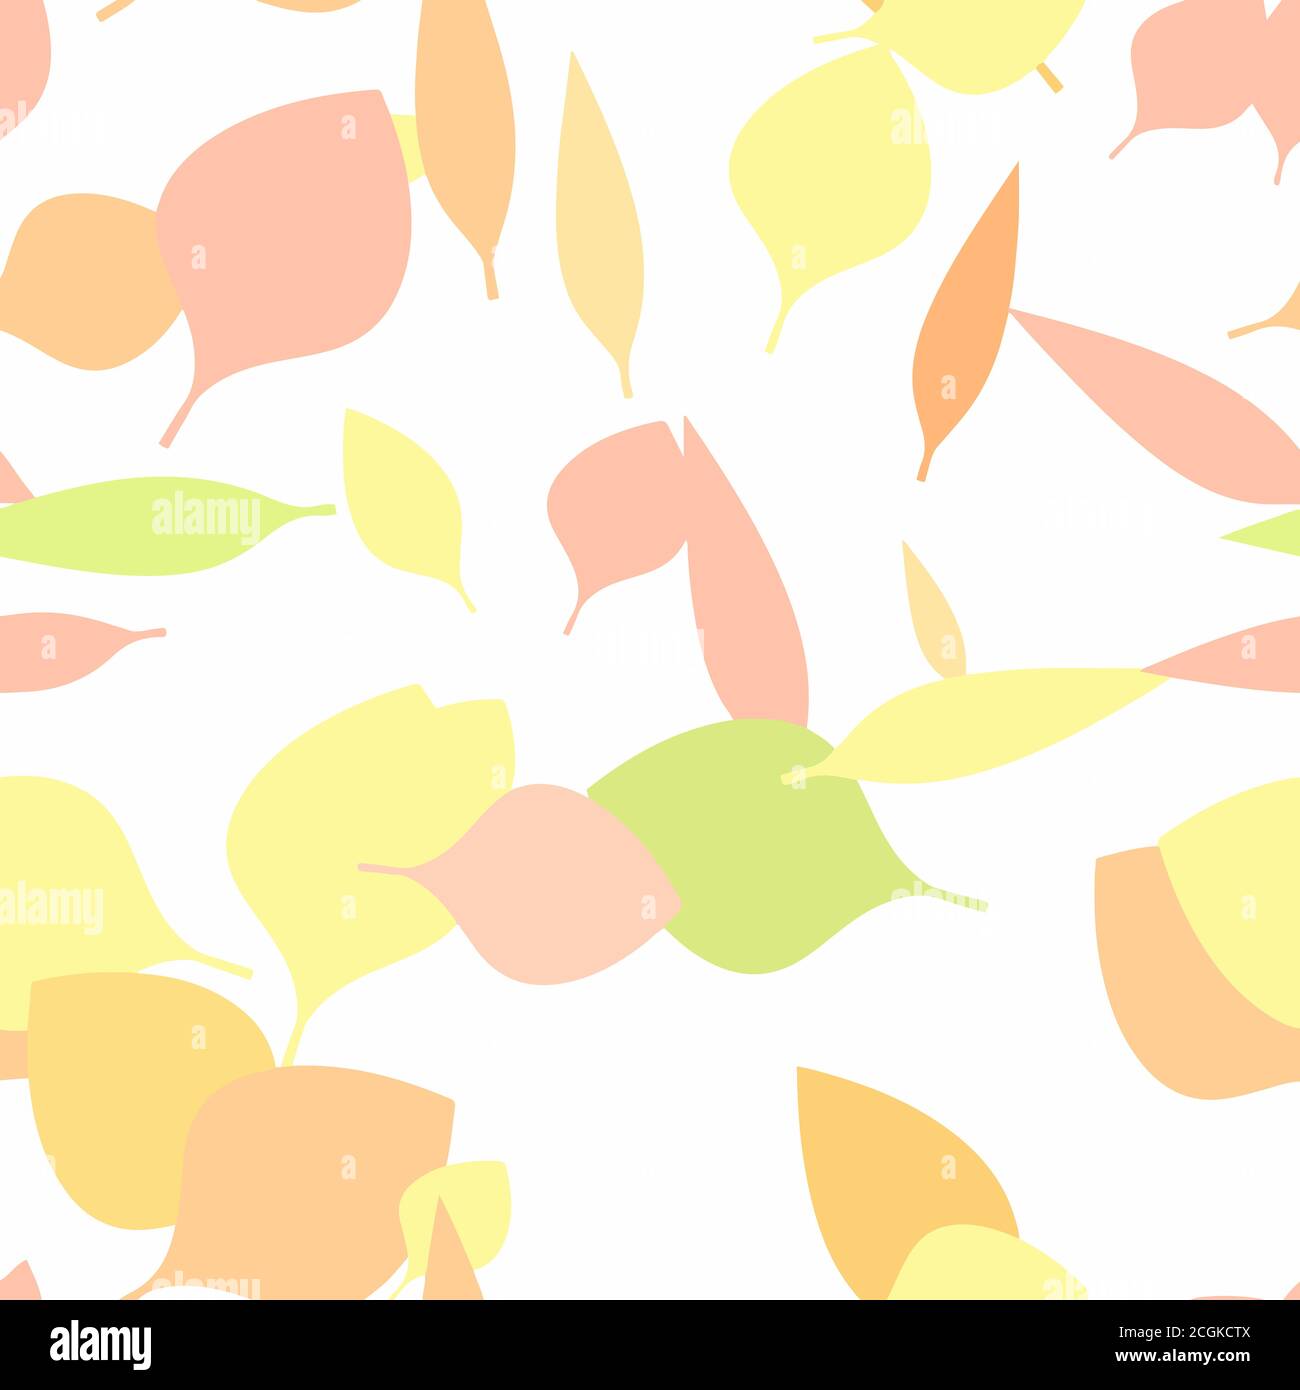 Fall Leaves Seamless Vector Pattern - Repeating ornament for textile, wraping paper, fashion etc. Stock Vector